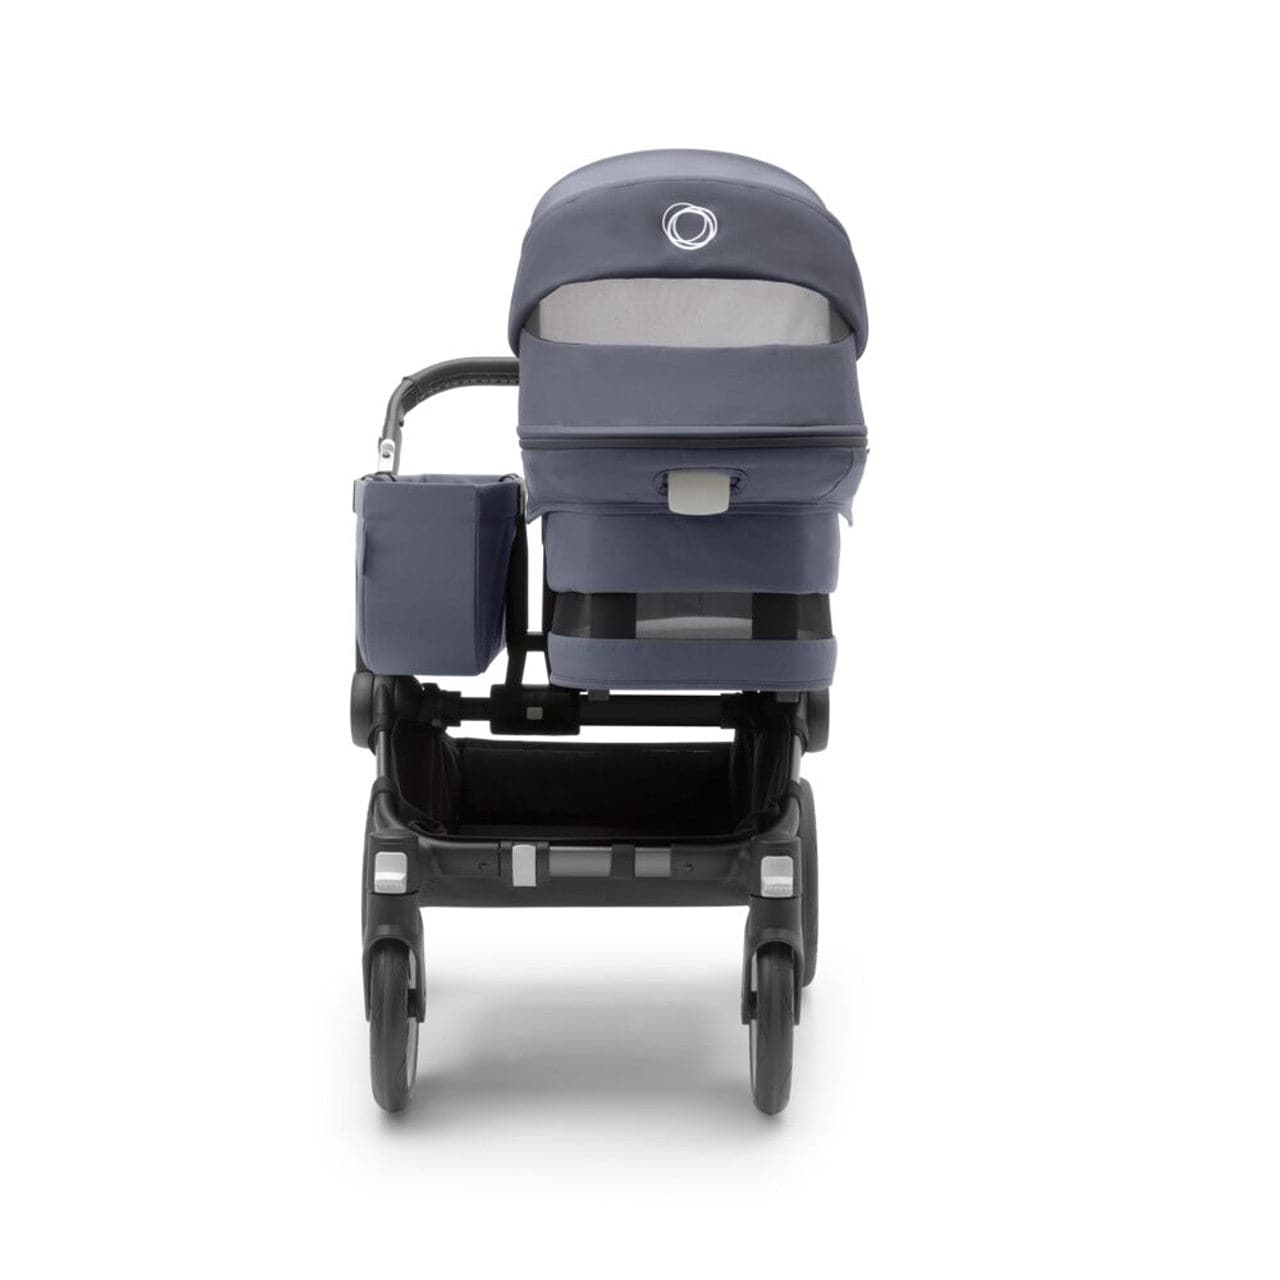 Bugaboo Donkey 5 Duo Travel System on Black/Grey Chassis - Choose Your Colour -  | For Your Little One